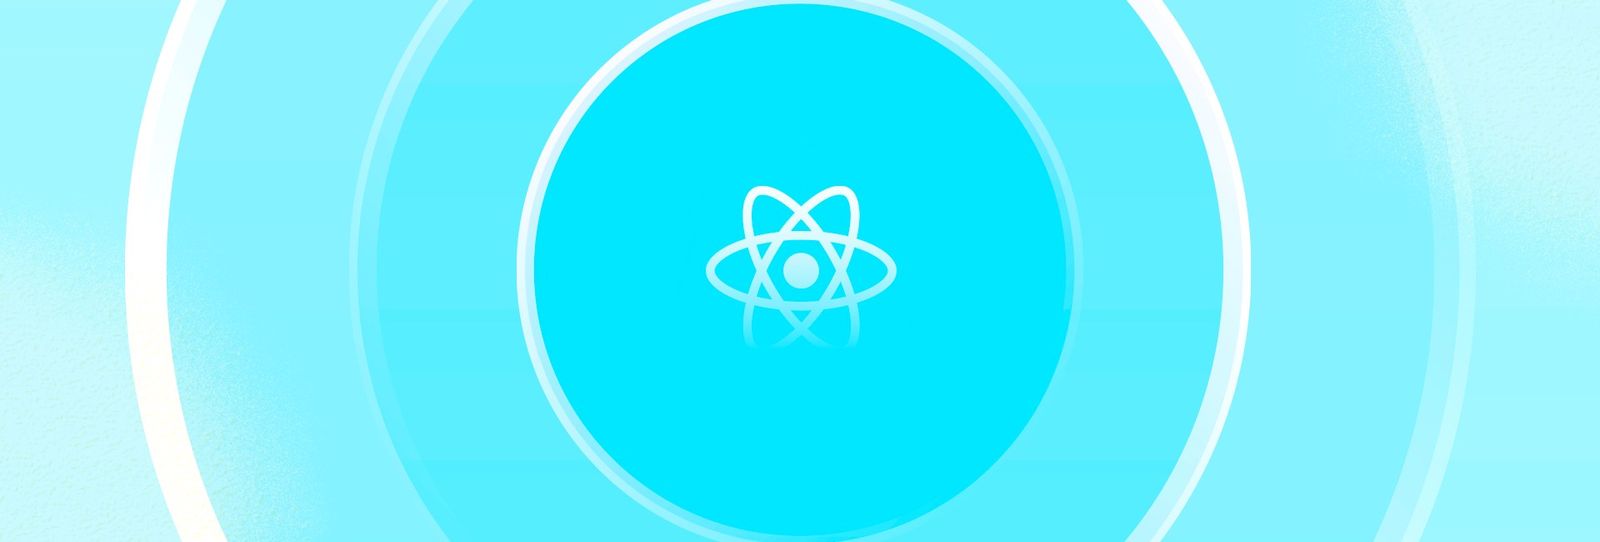 What’s new in React? The new launch review